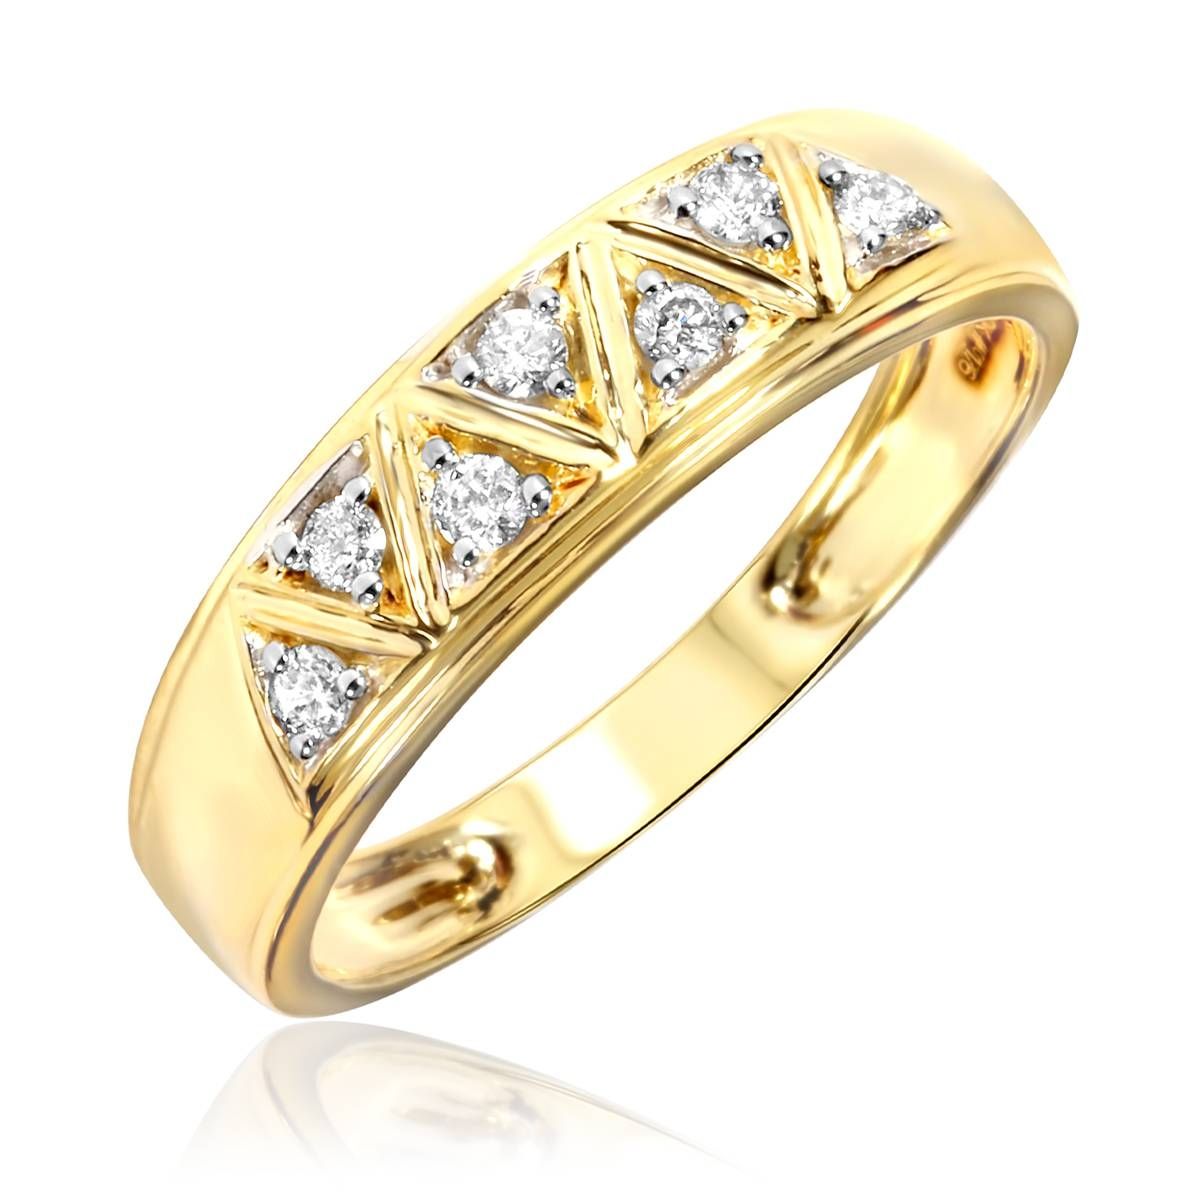 1/2 Carat Diamond Trio Wedding Ring Set 14k Yellow Gold With Wedding Rings Gold For Women (View 7 of 15)